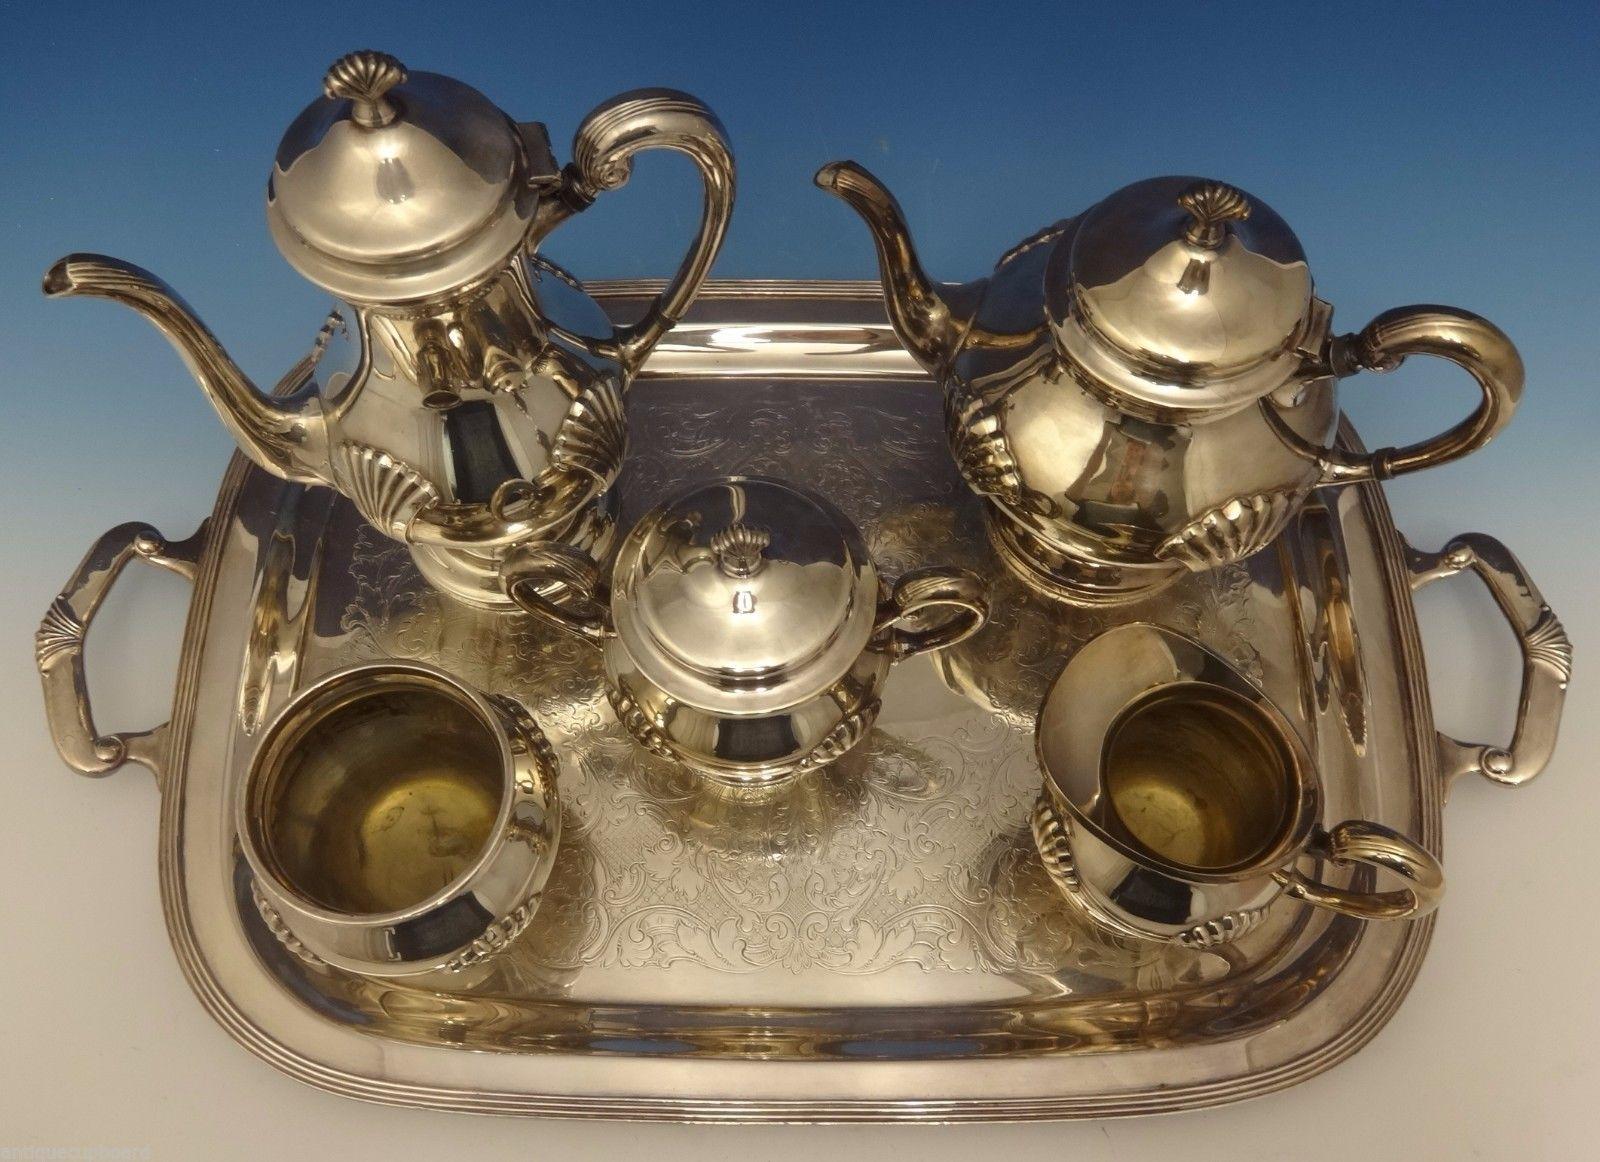 American Onslow by Tuttle Silver Plate Tea Set of 6 Pieces